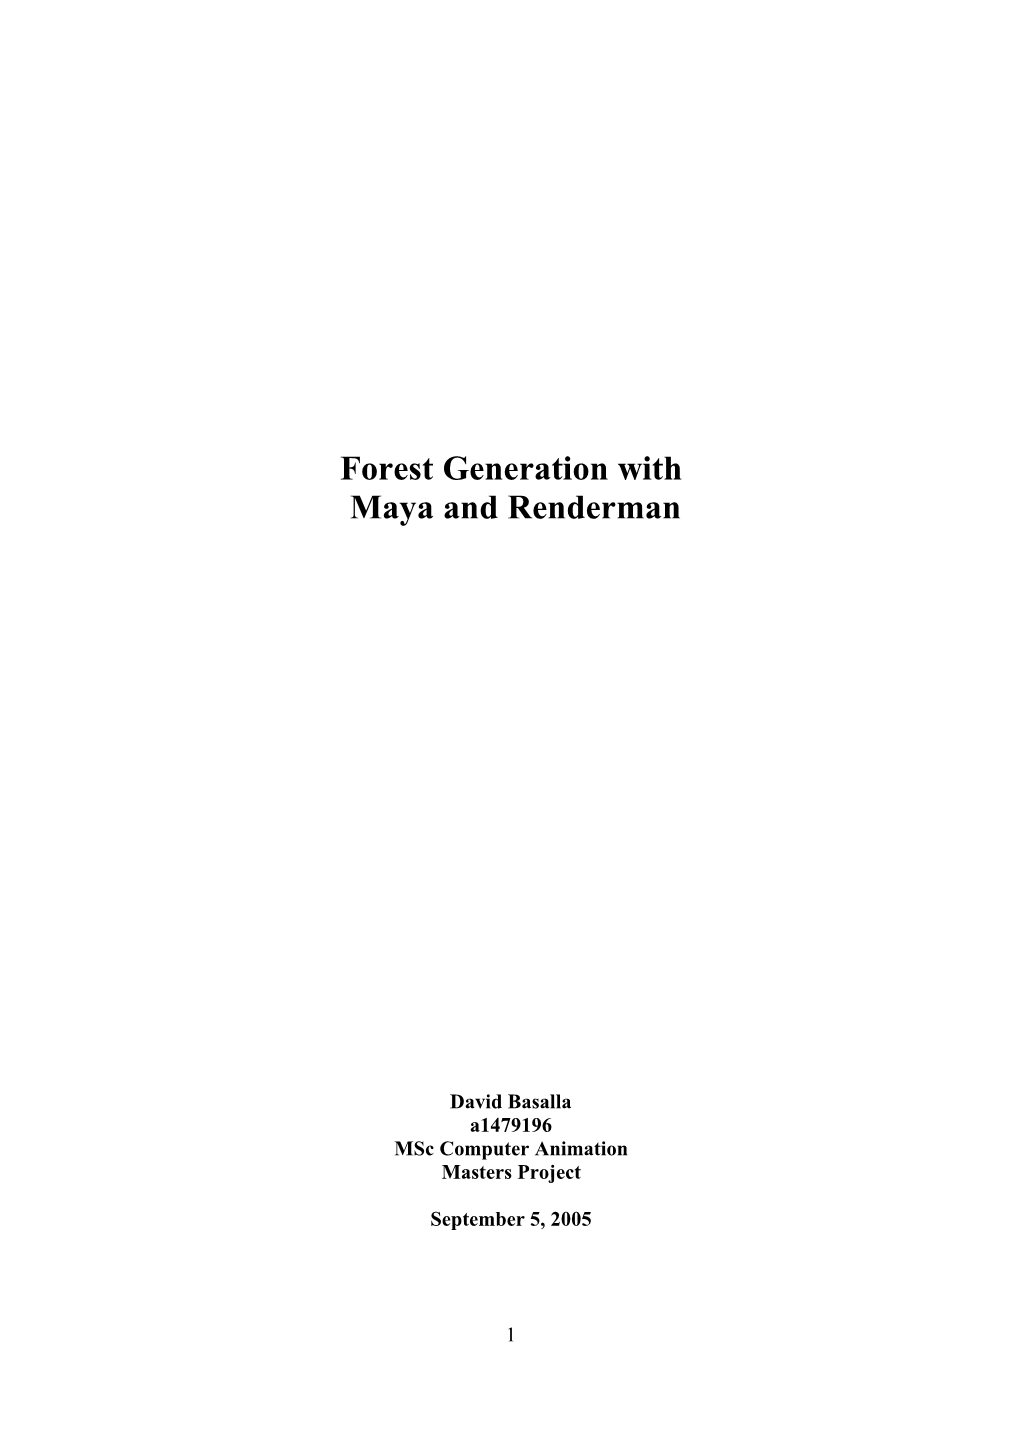 Forest Generation with Maya and Renderman